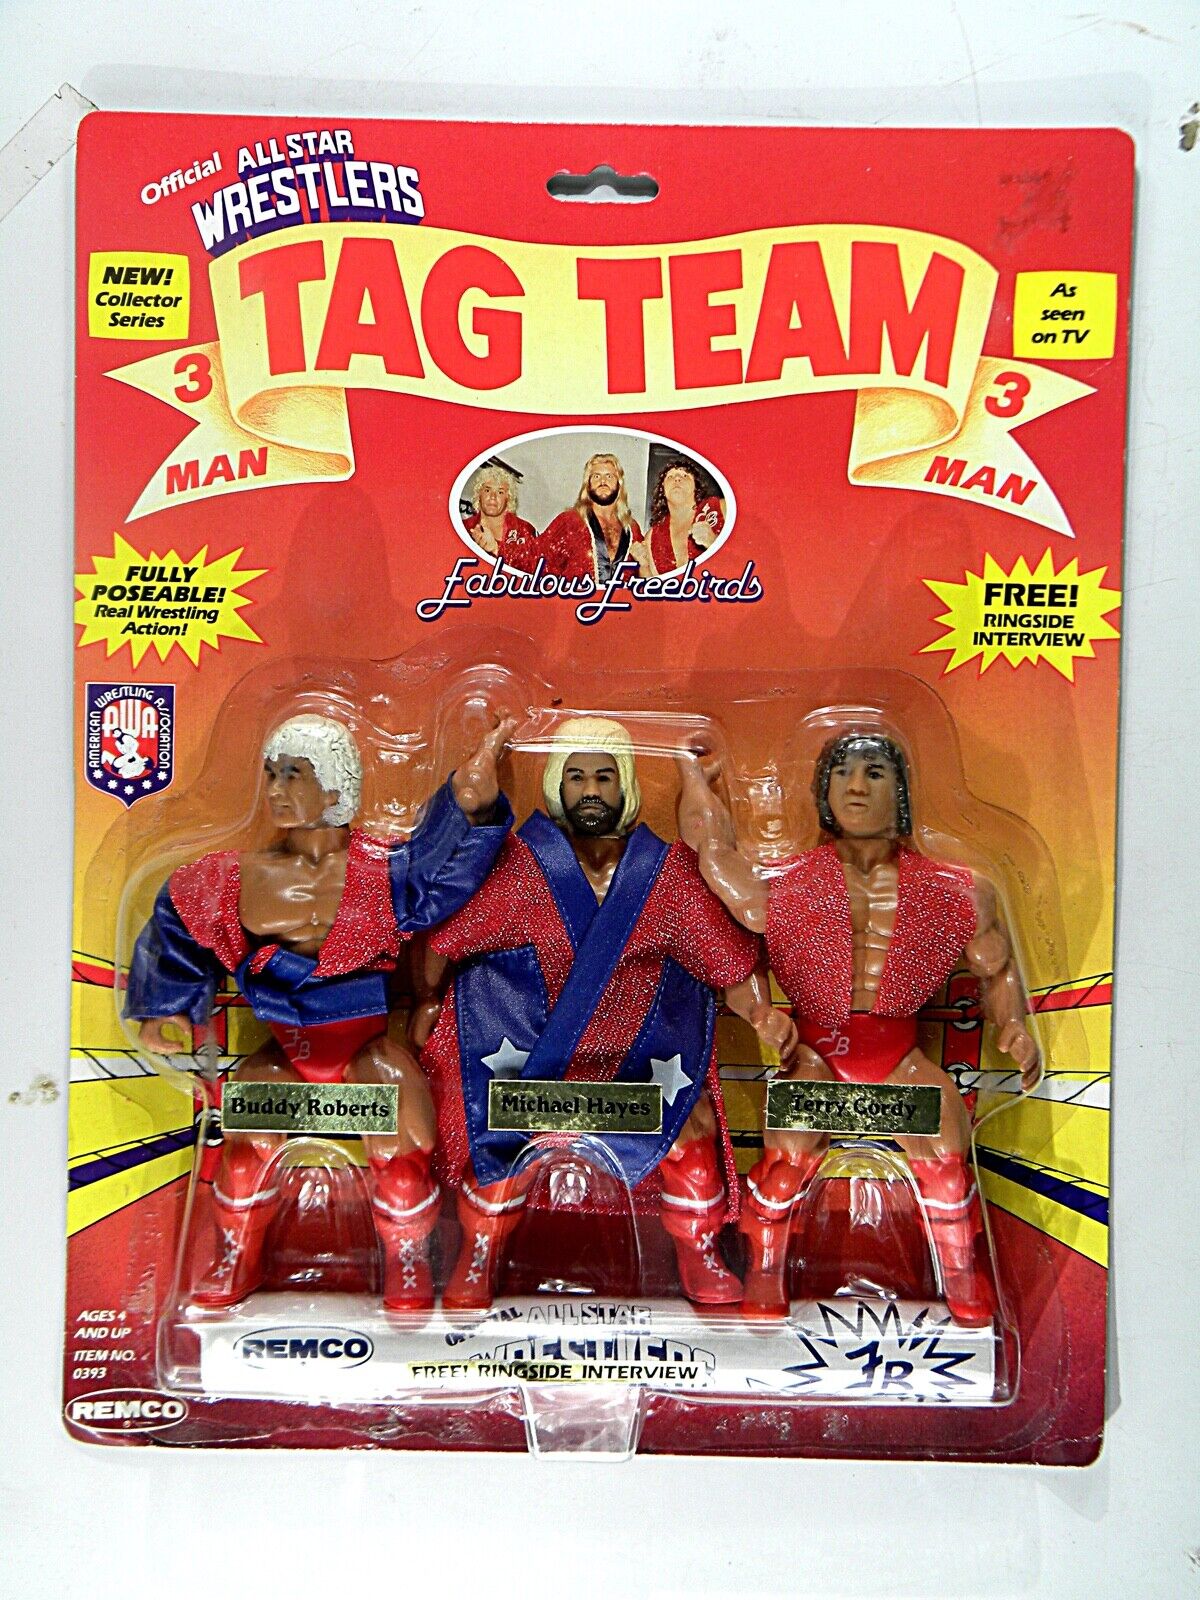 1985 AWA Remco All Star Wrestlers Series 3 Fabulous Freebirds: Buddy Roberts, Terry Gordy [With Muscular Body] & Michael Hayes